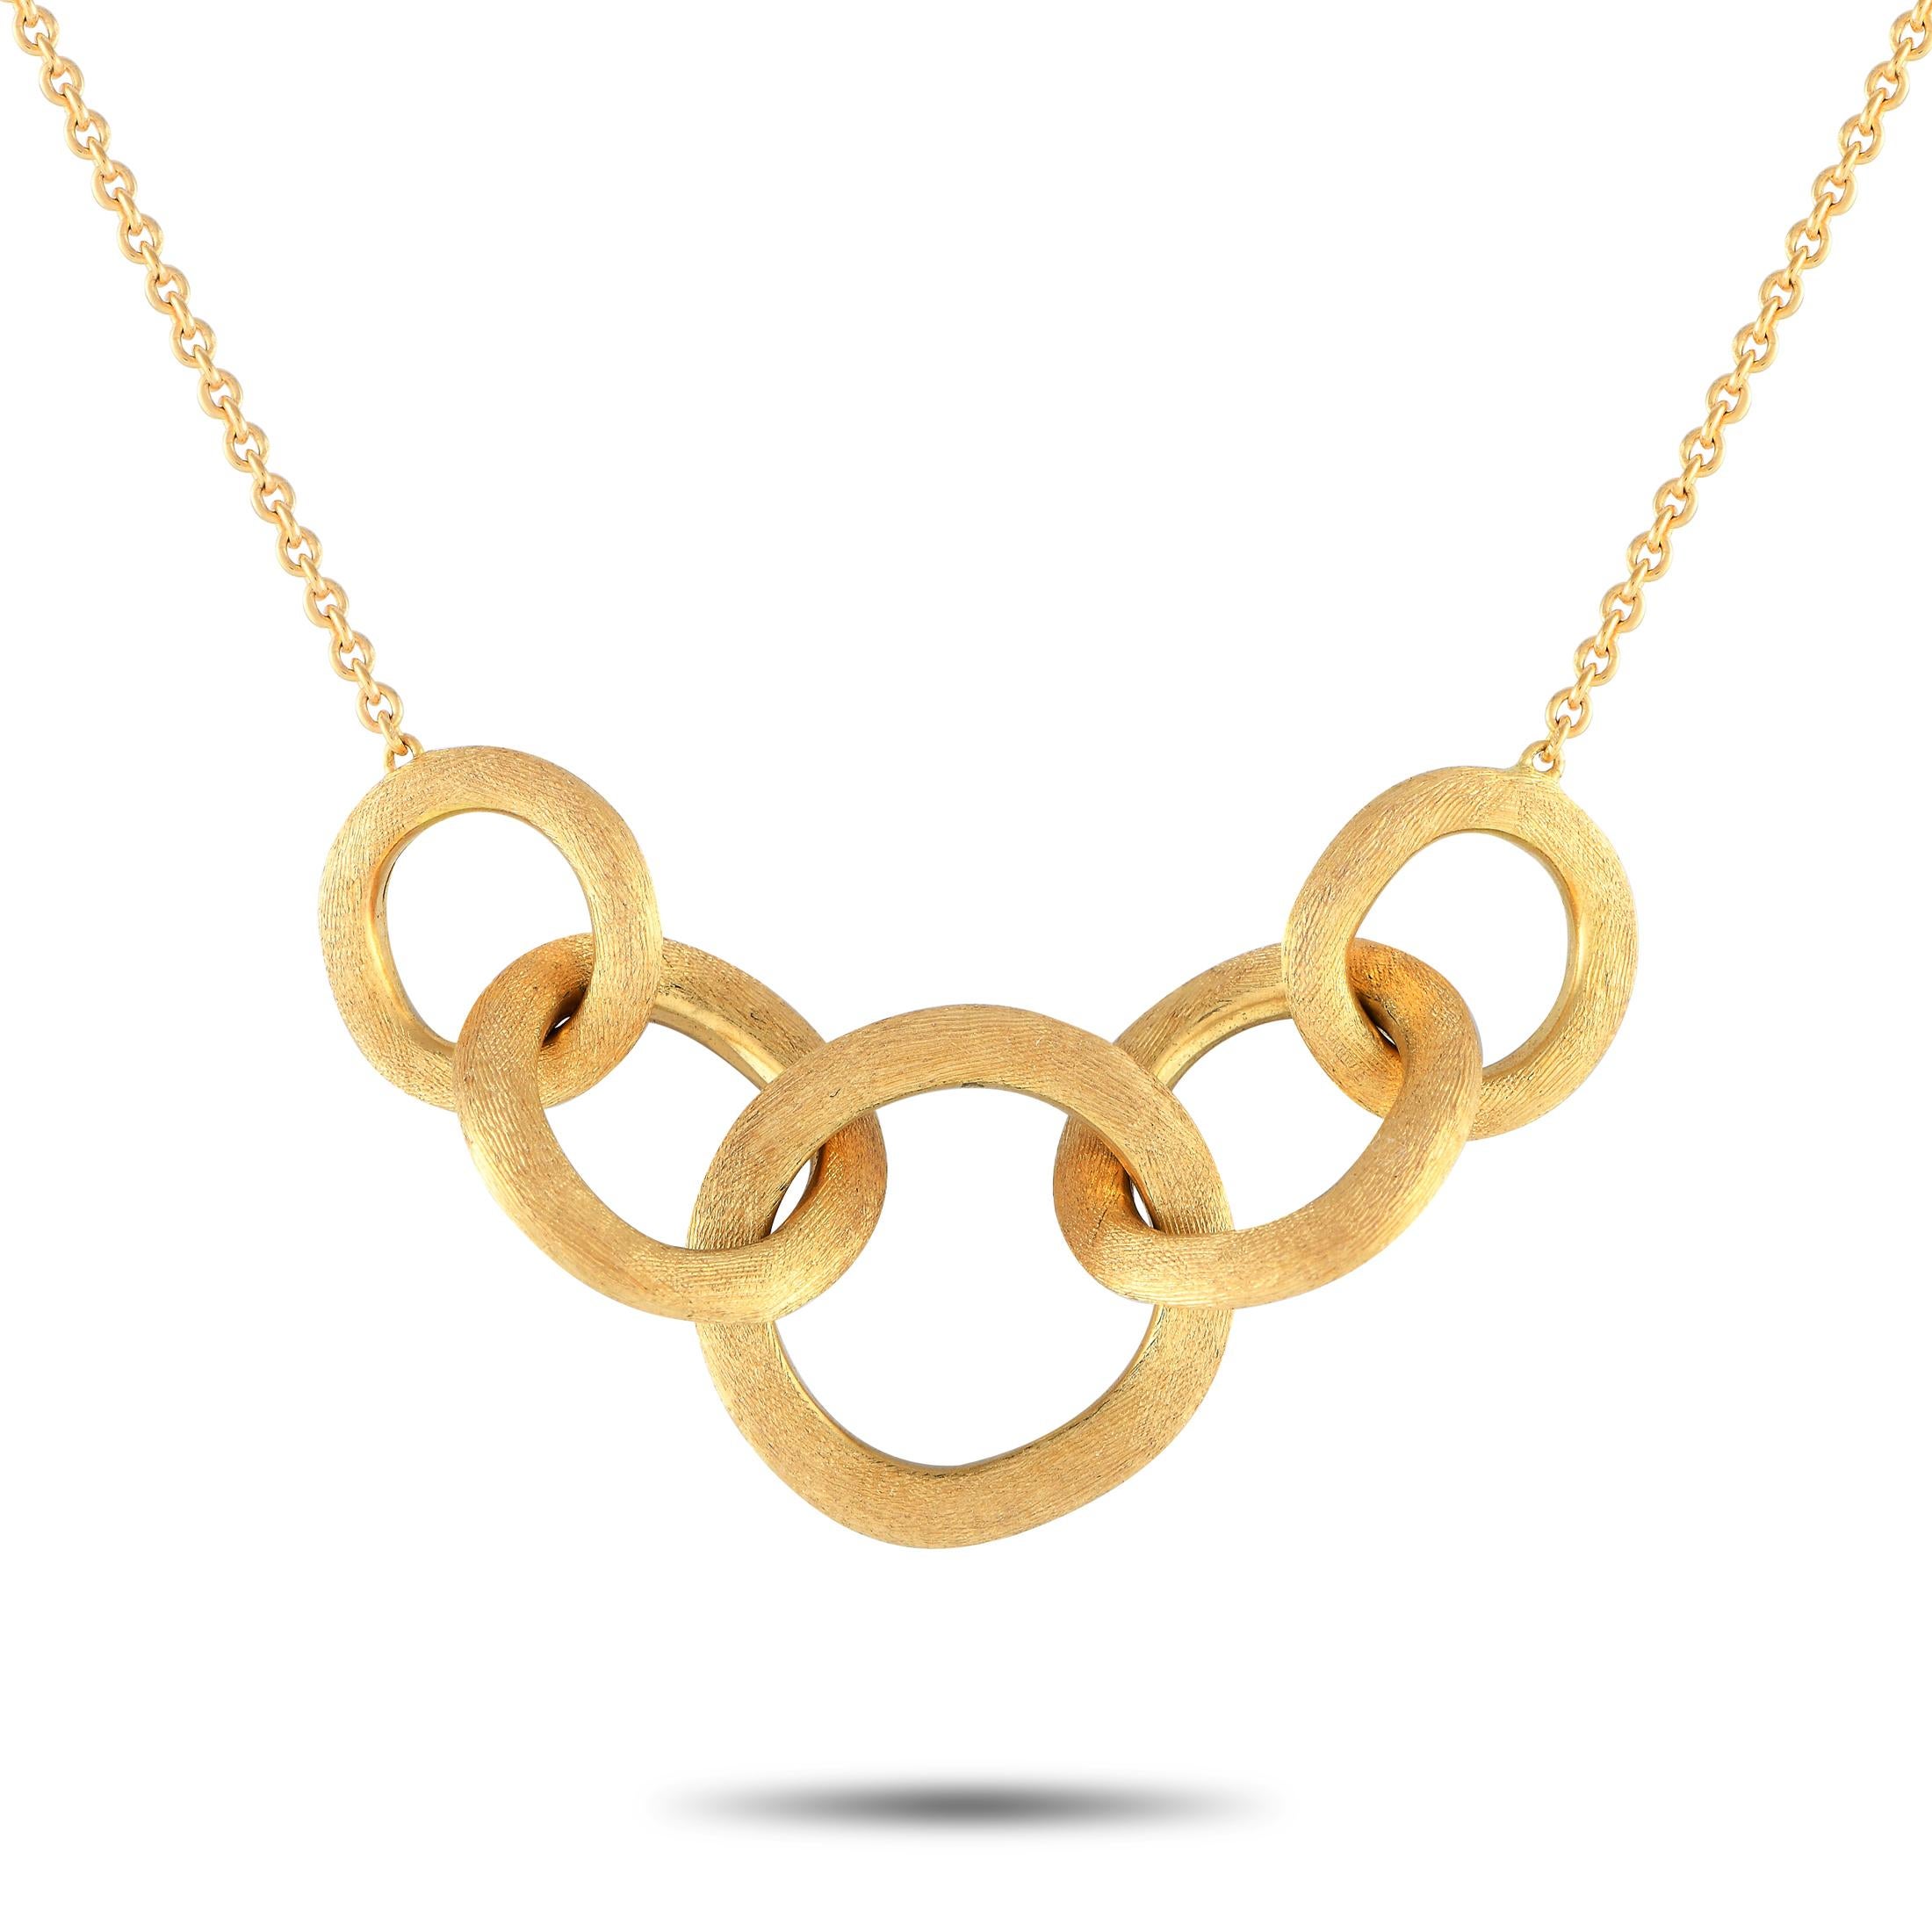 Women's Marco Bicego Jaipur 18K Yellow Gold Necklace